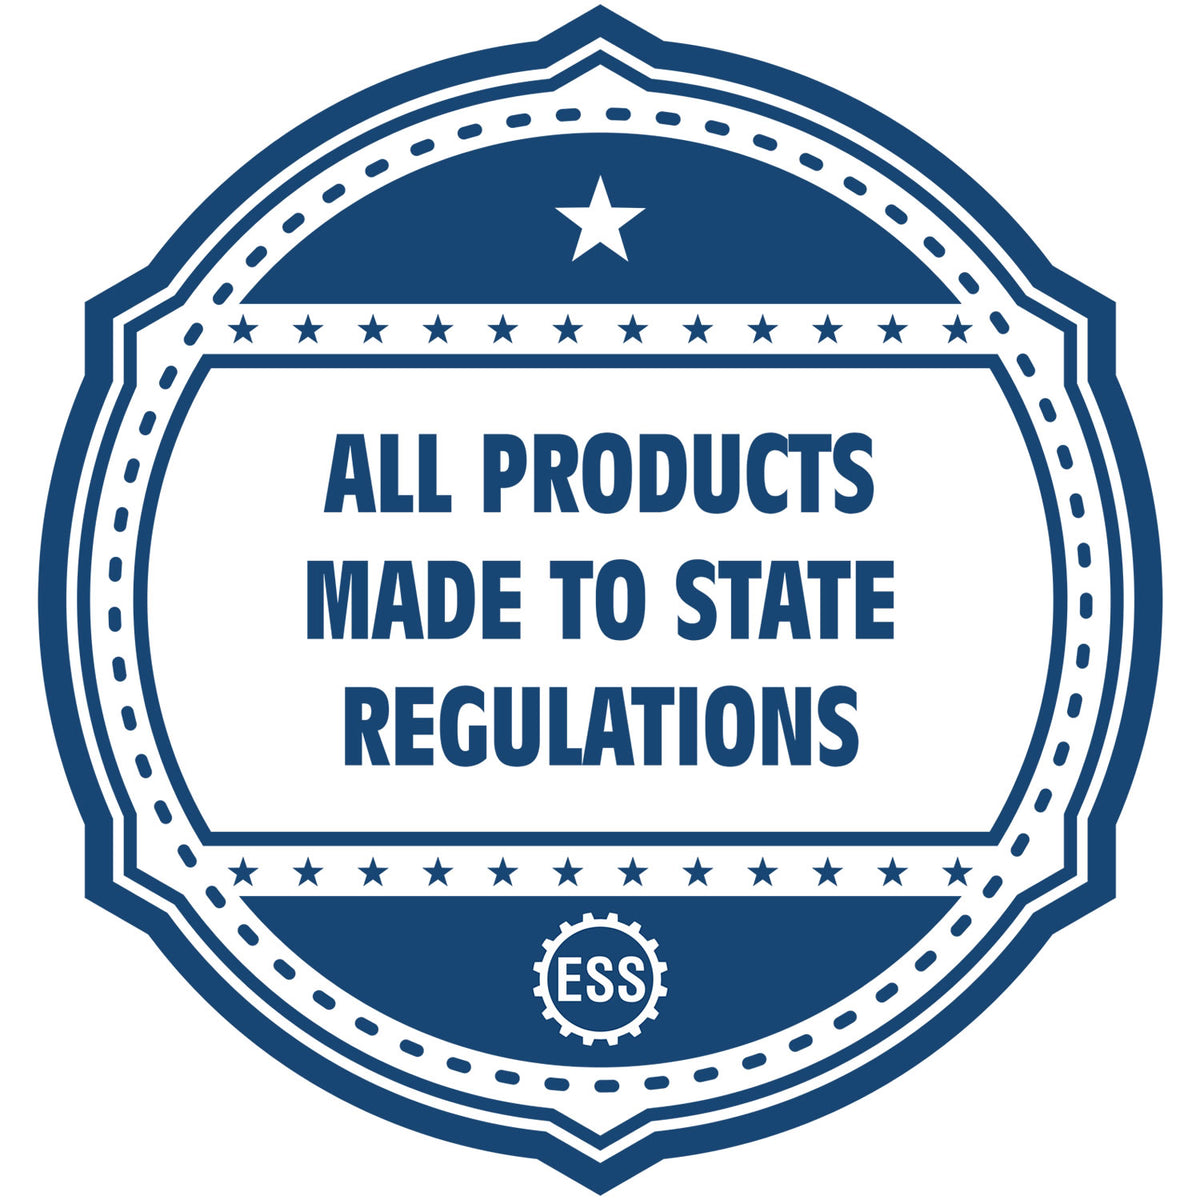 An icon or badge element for the State of New York Long Reach Architectural Embossing Seal showing that this product is made in compliance with state regulations.